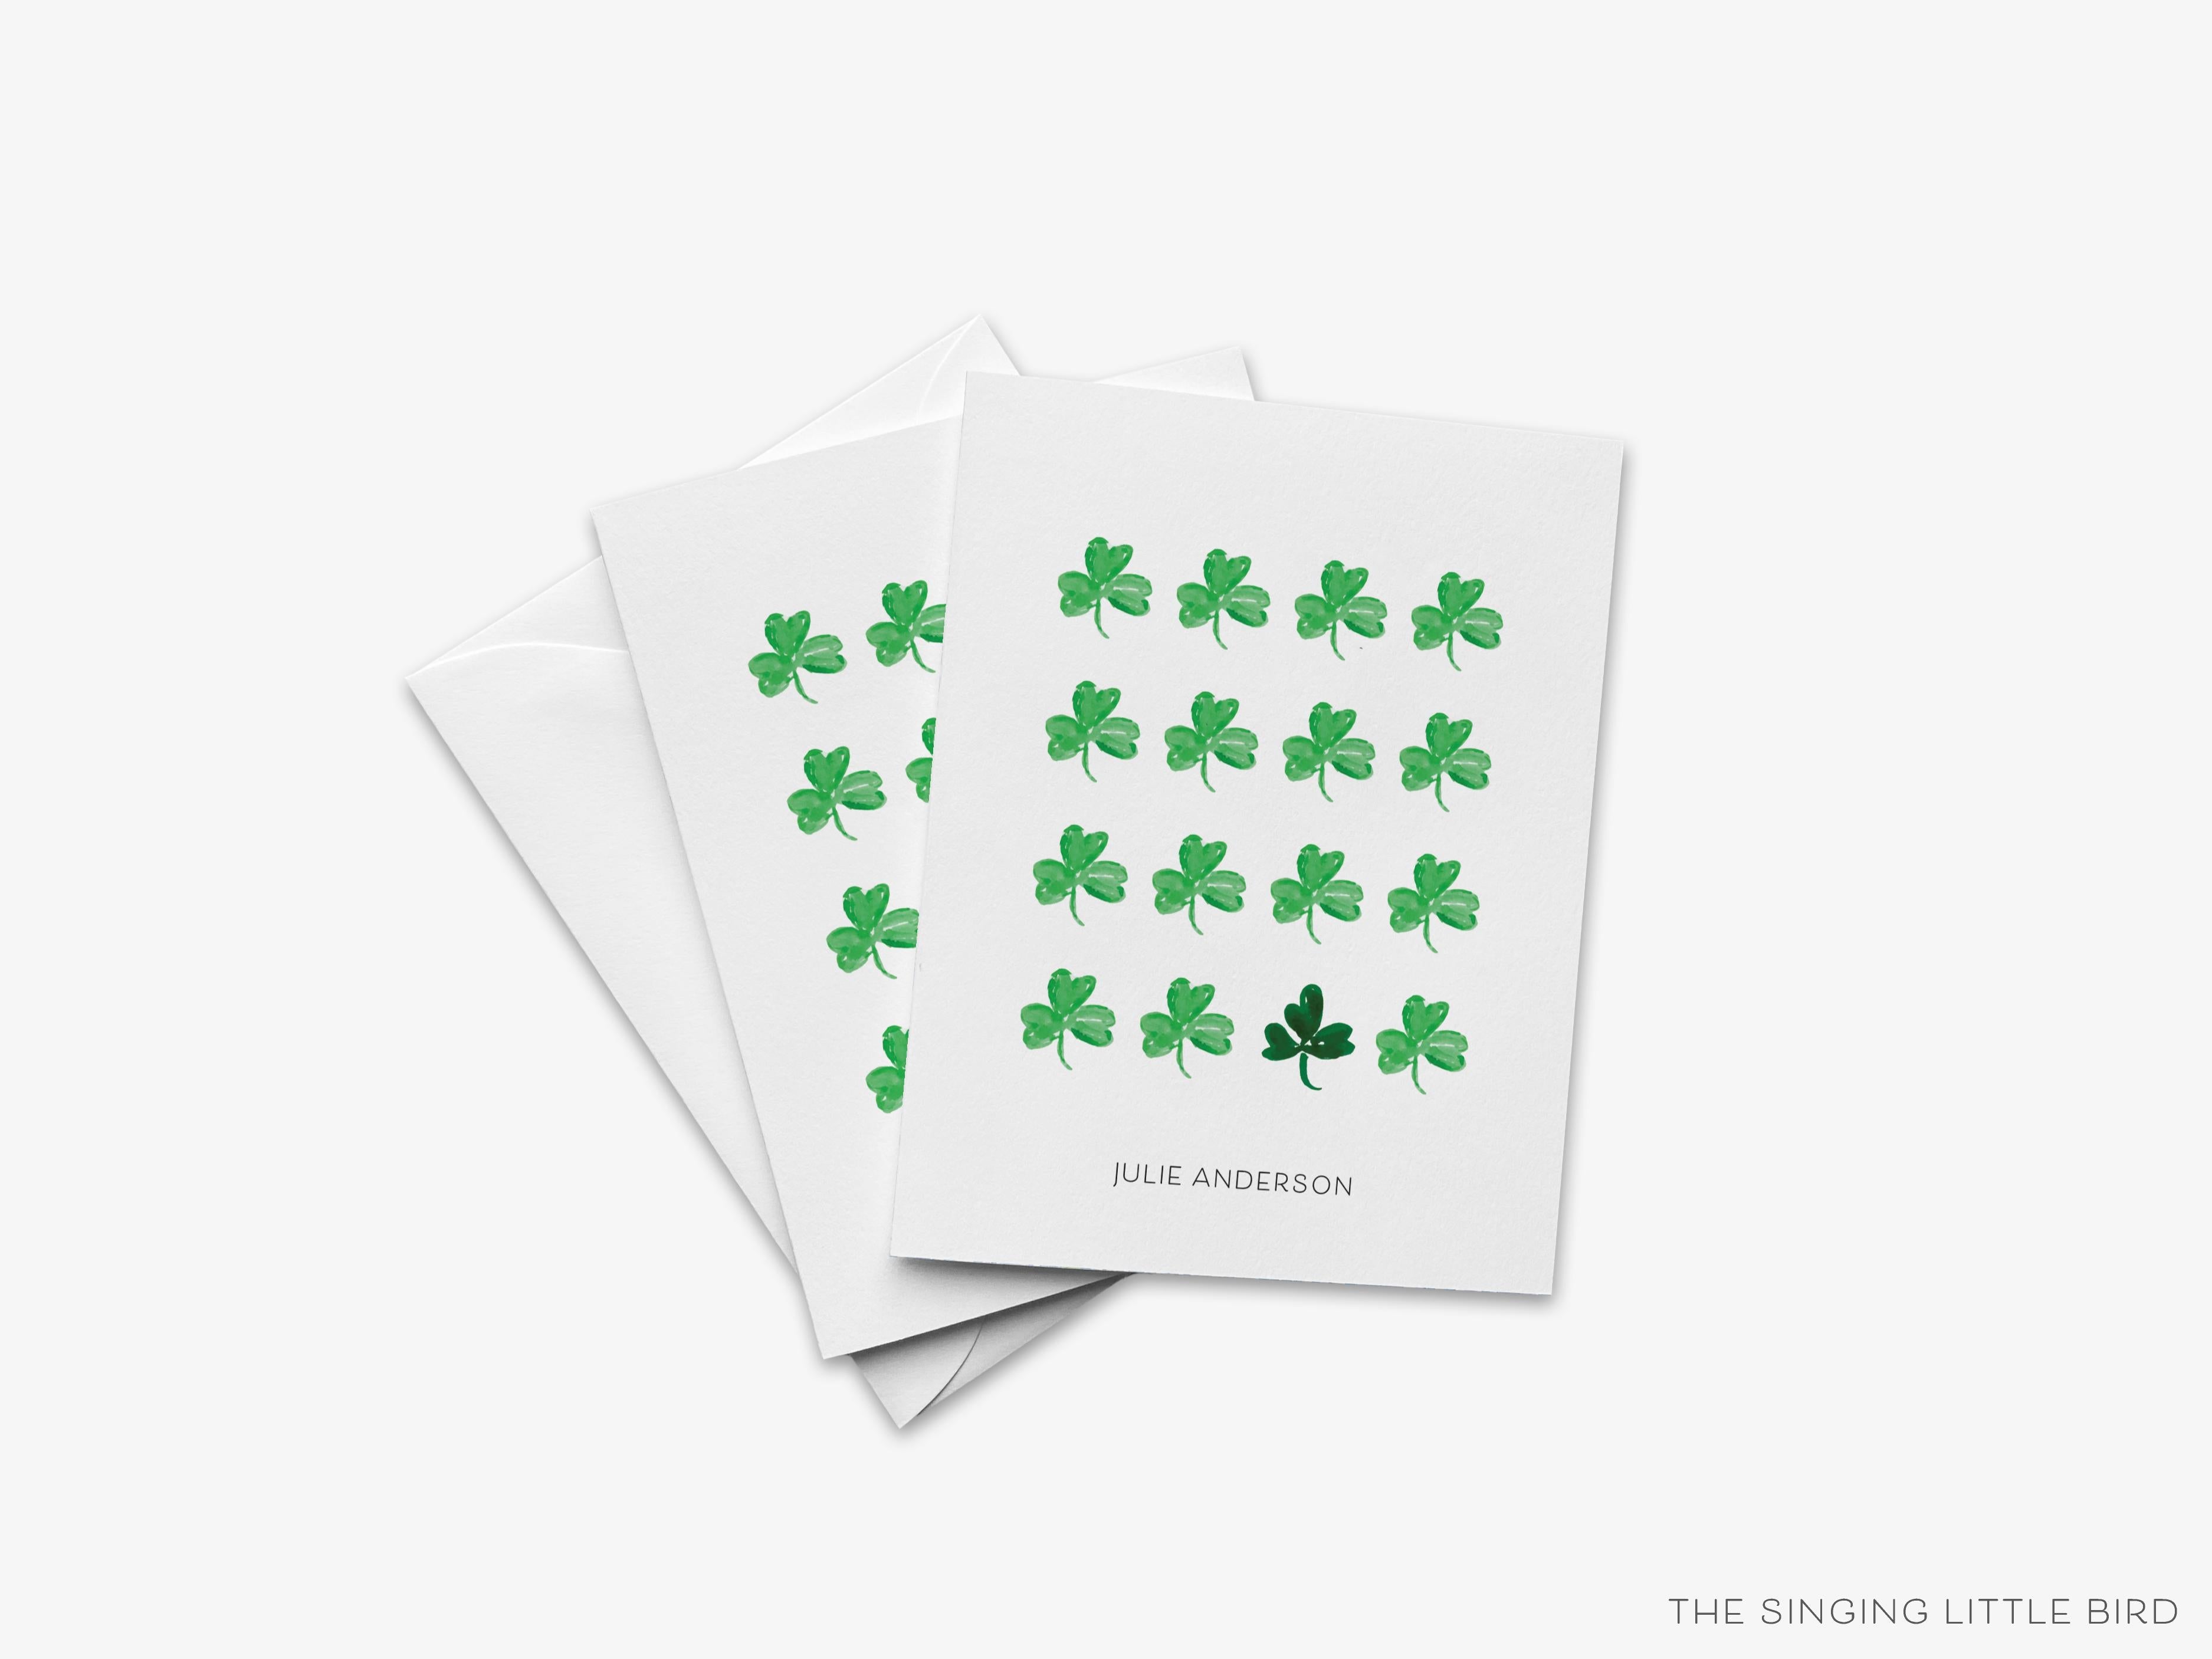 Shamrock Greeting Card-These folded spring cards are 4.25x5.5 and feature our hand-painted watercolor three leaf clovers, printed in the USA on 100lb textured stock. They come with a White envelope and make a lovely card to say thank you or just because to your friends. -The Singing Little Bird